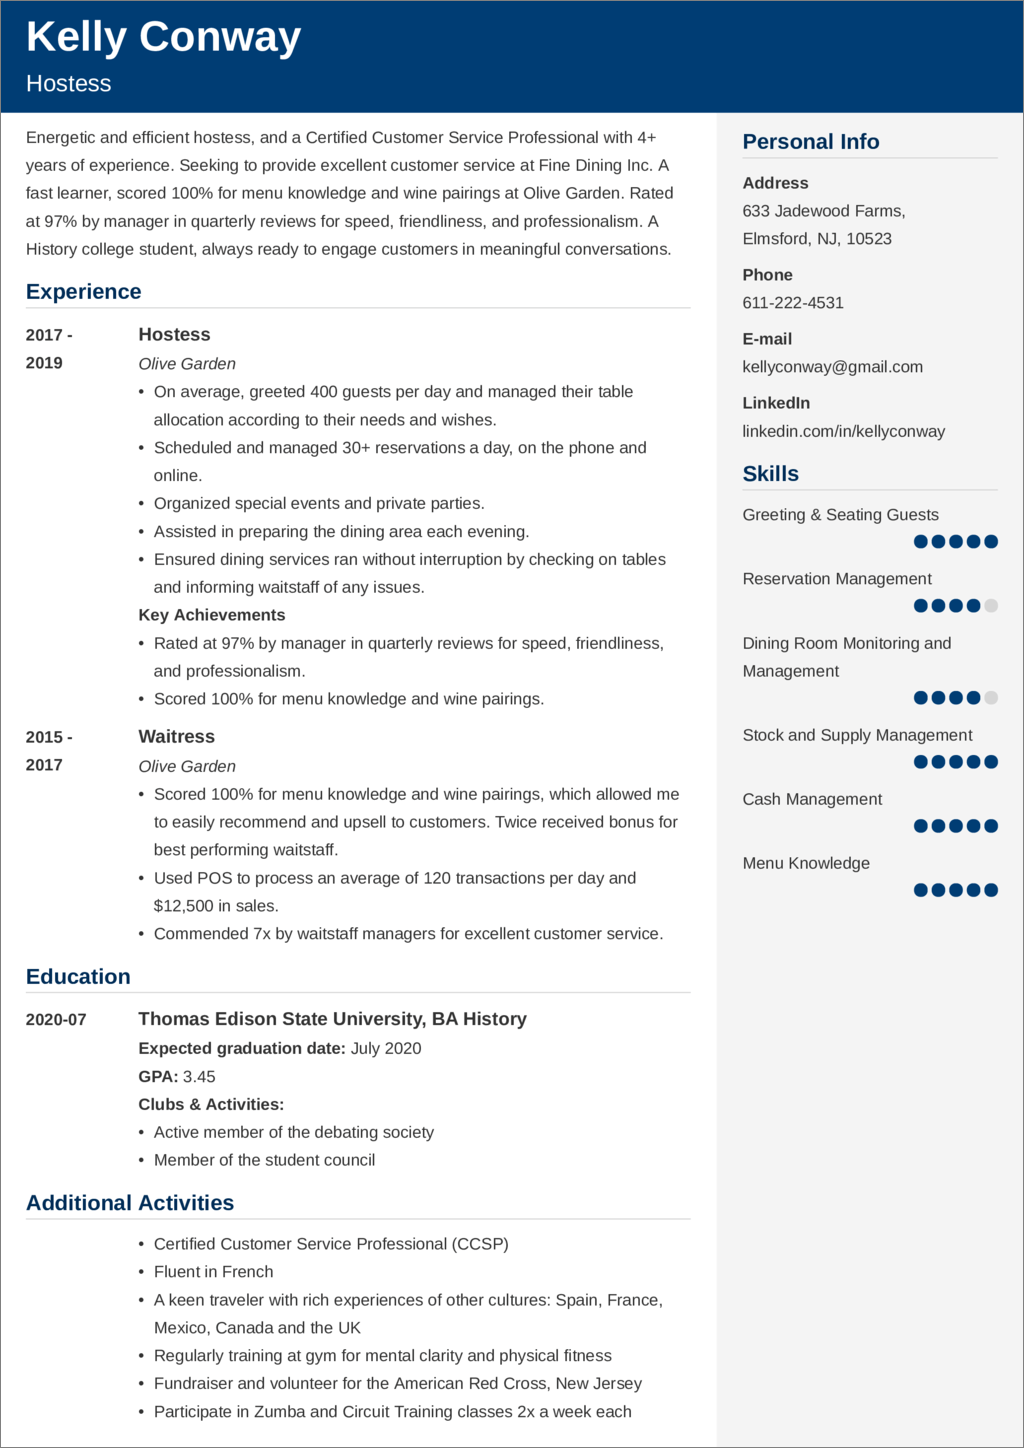 Hostess Resume—Examples and 25+ Writing Tips